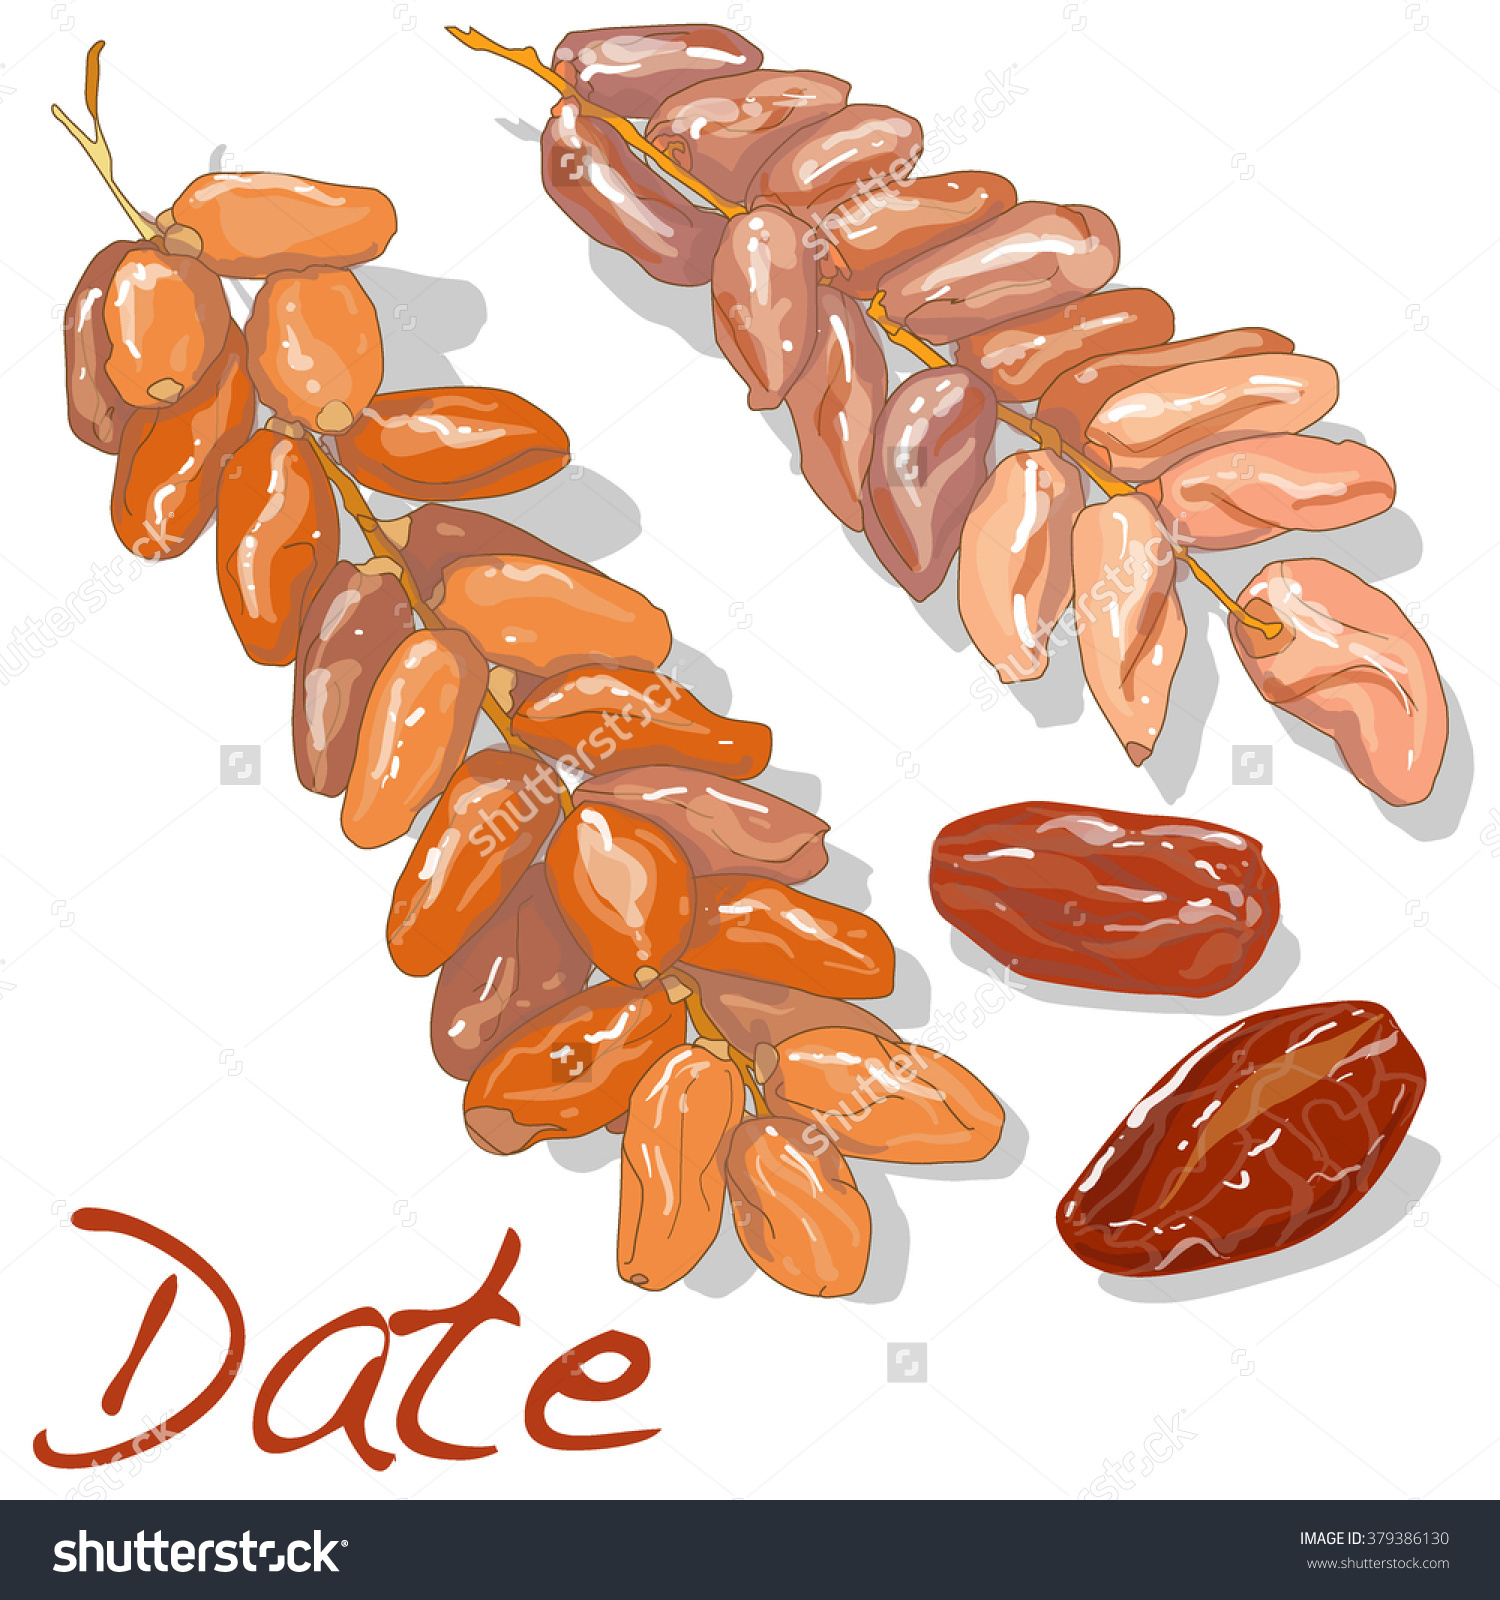 Date Fruit Dry Date Fruit Isolated Stock Vector 379386130.